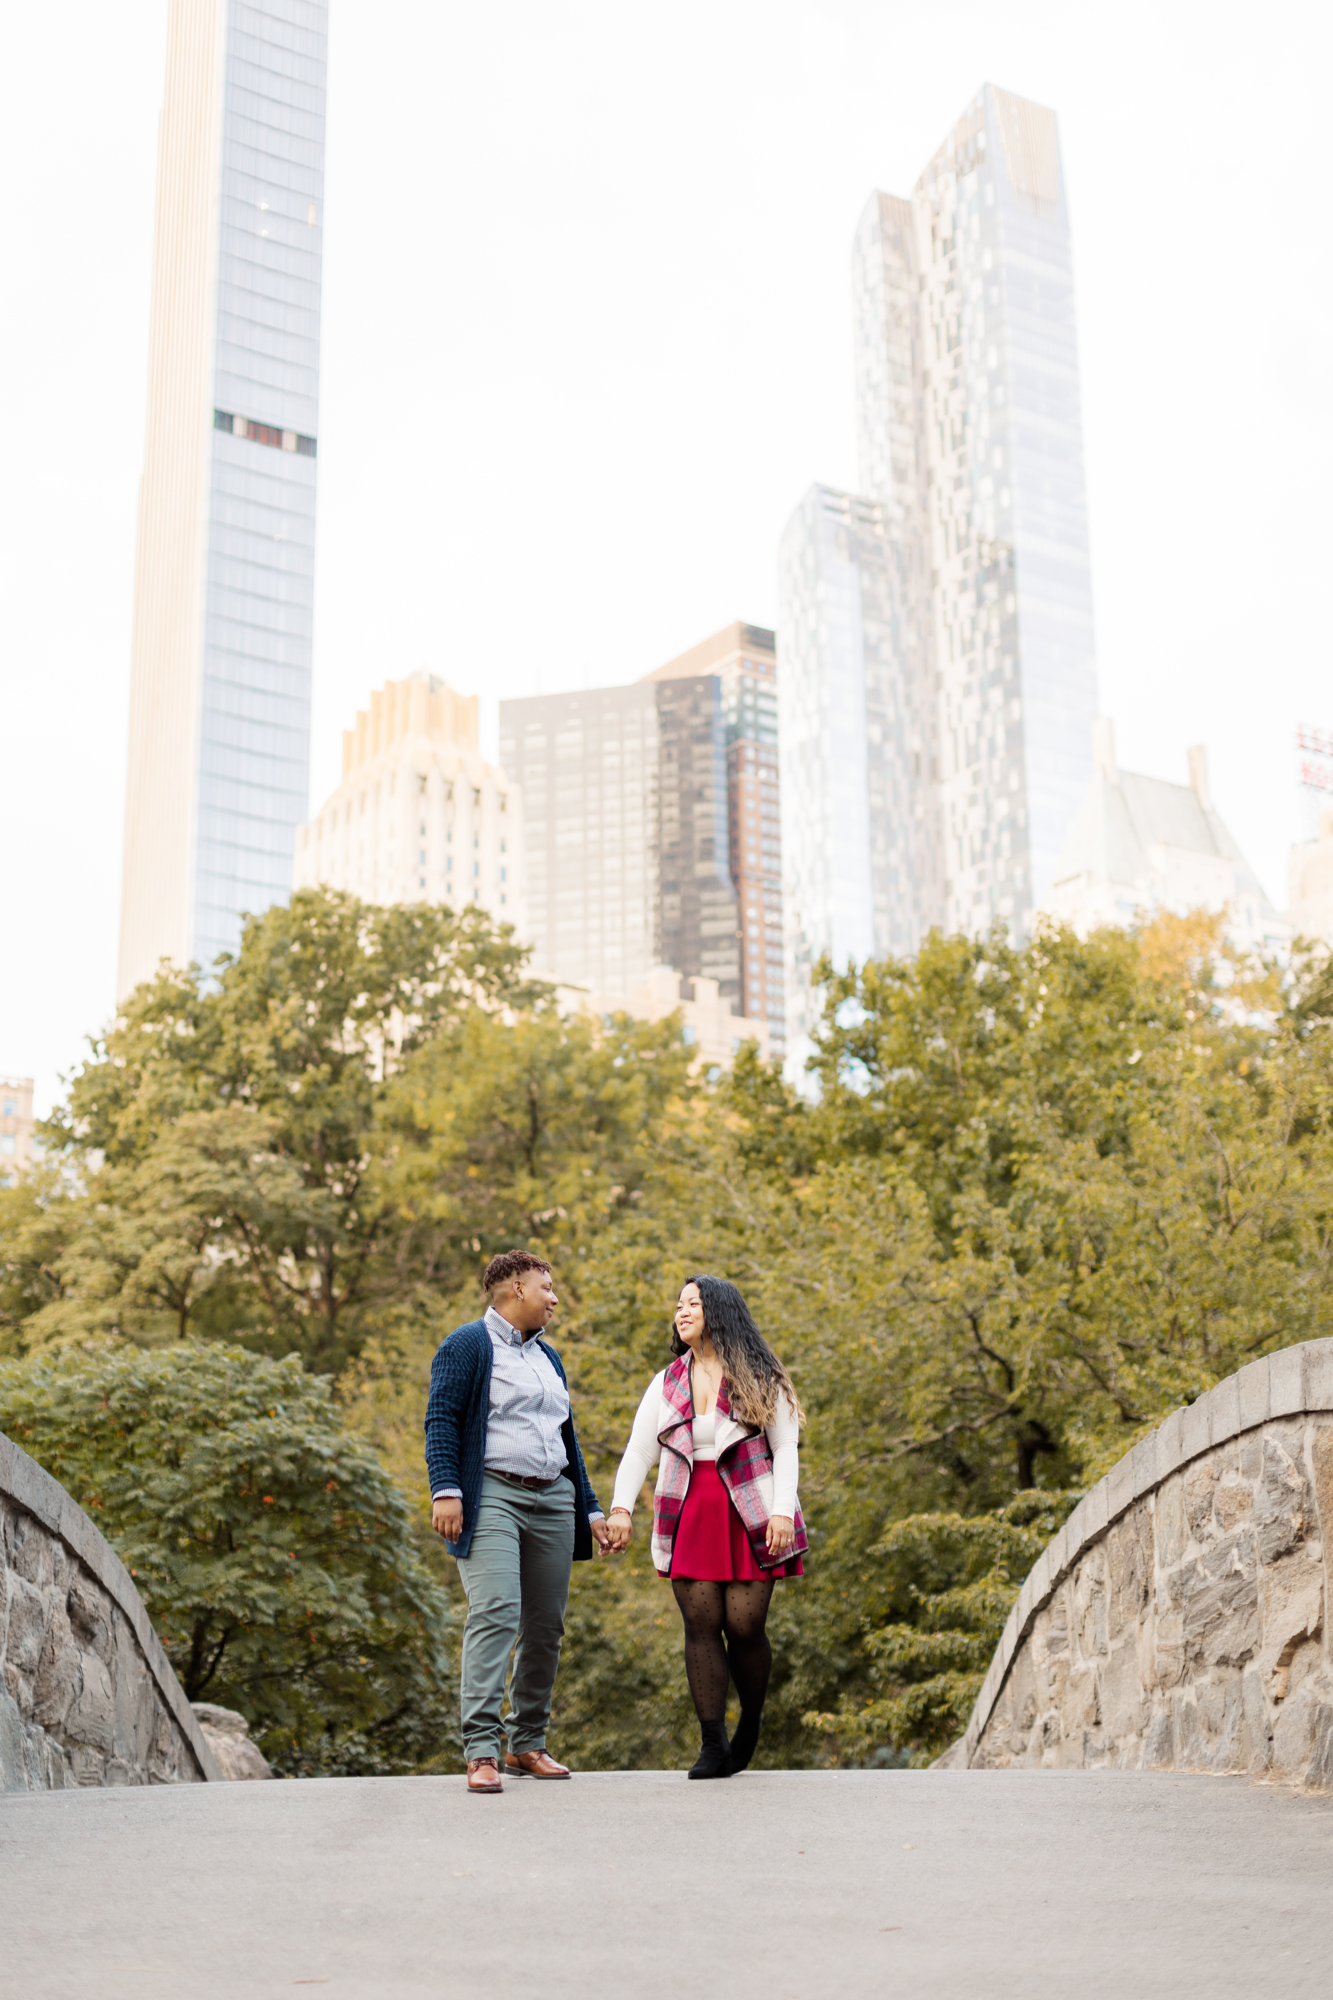 Beautiful Central Park Engagement Photos in Autumn at Sunrise